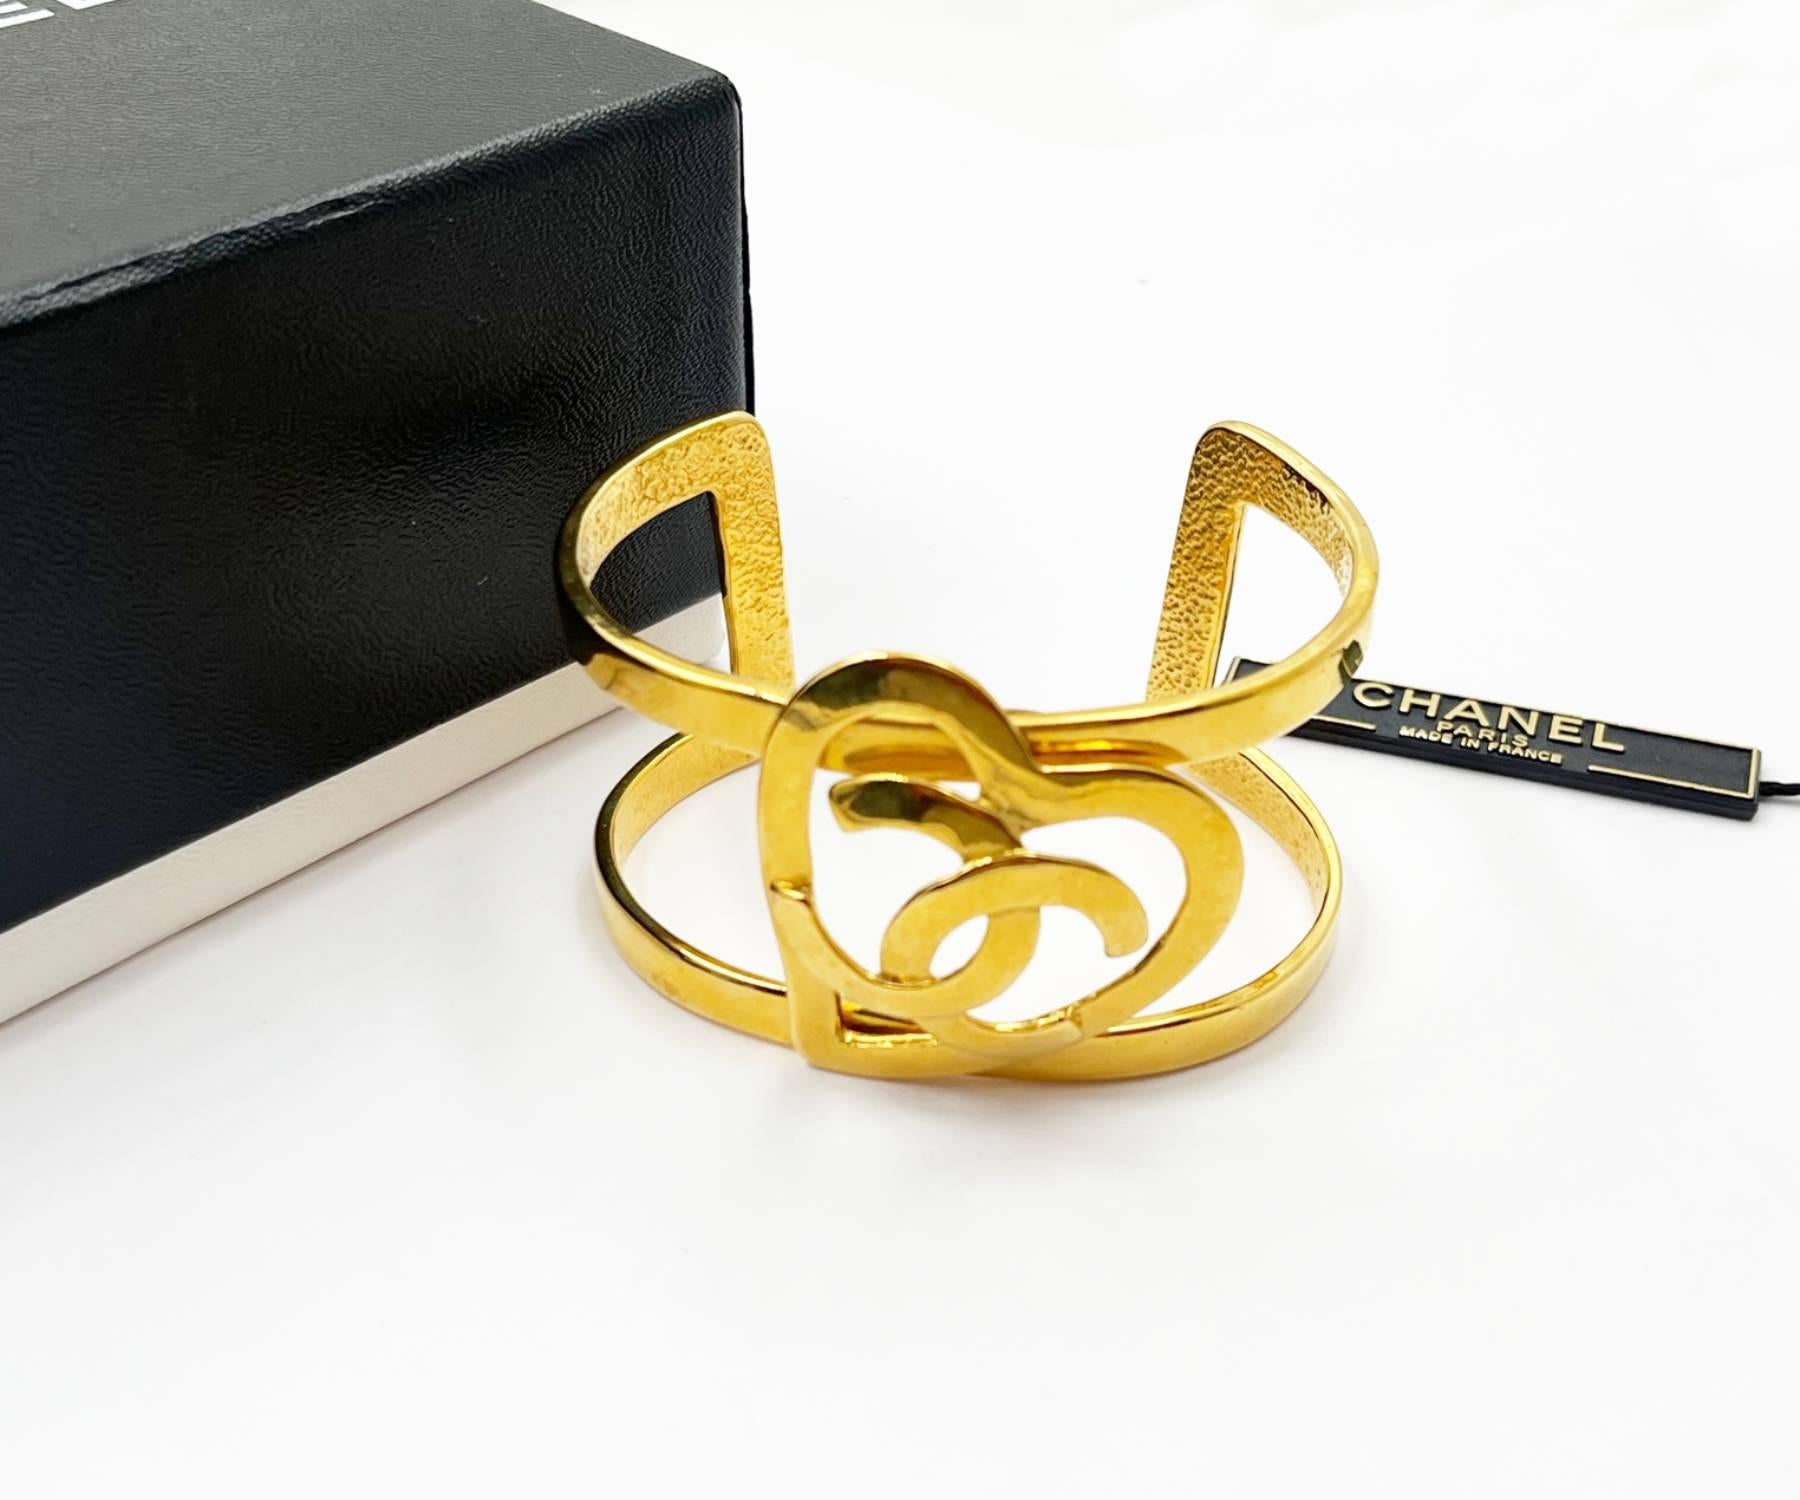 Chanel Vintage Gold Plated CC Heart Double Cuff Bracelet 

*Marked 95
*Made in France
*Comes with the original box and tag

-It is approximately 2.5